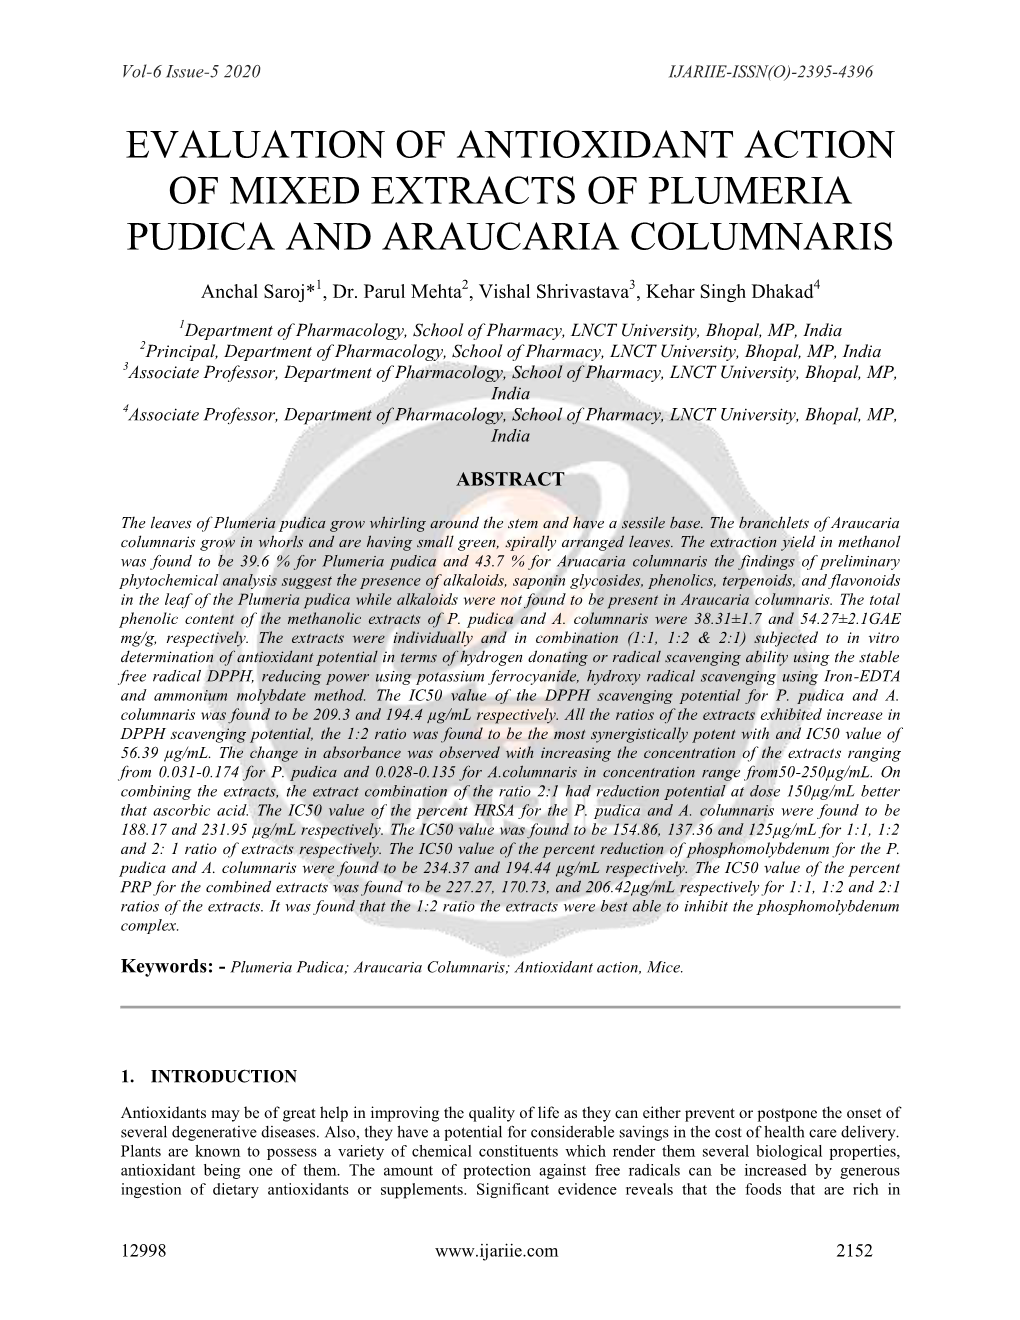 Evaluation of Antioxidant Action of Mixed Extracts of Plumeria Pudica and Araucaria Columnaris